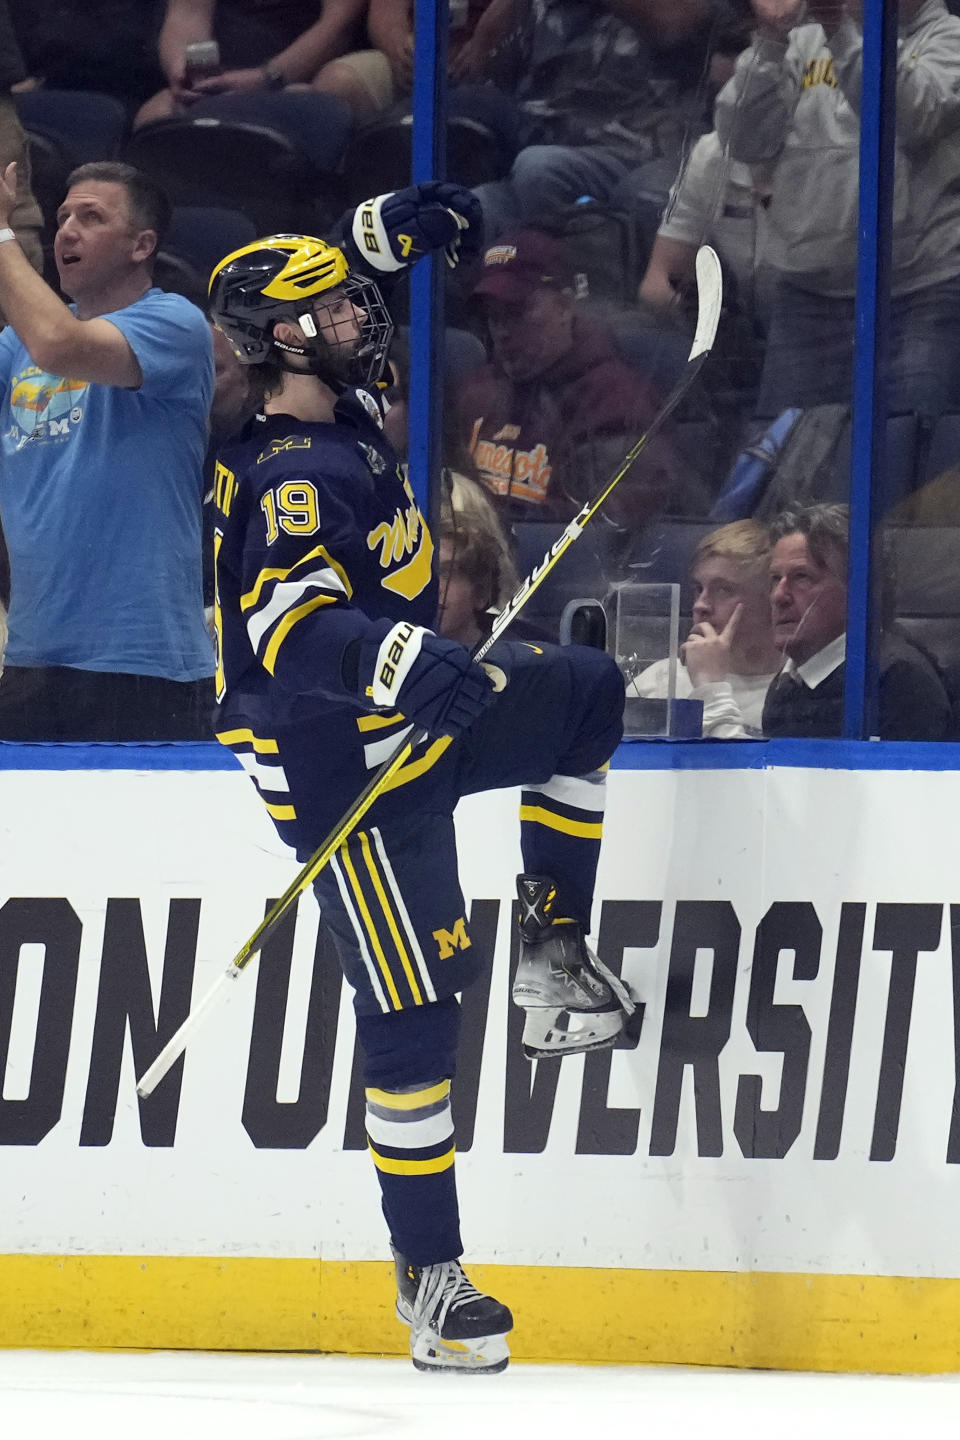 Michigan forward Adam Fantilli (19) celebrates his goal against Quinnipiac during the second period of an NCAA semifinal game in the Frozen Four college hockey tournament Thursday, April 6, 2023, in Tampa, Fla. (AP Photo/Chris O'Meara)